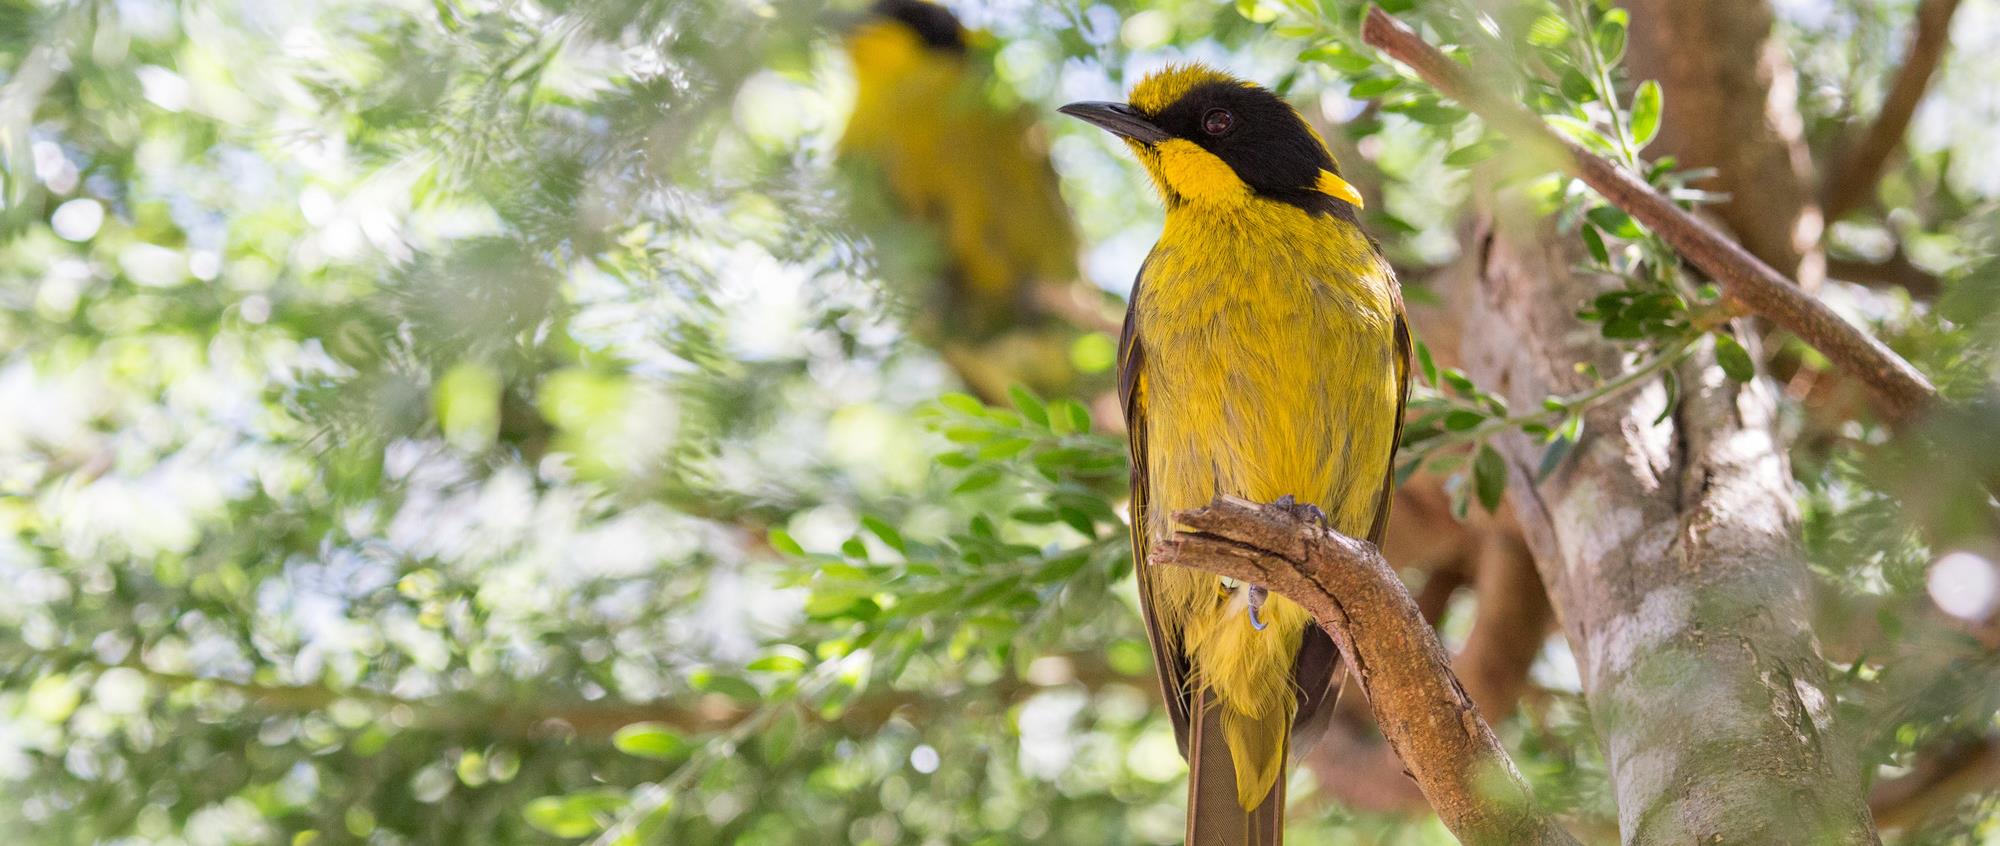 Two Helmeted Honeyeaters on a branch with sun glistening through the leaves